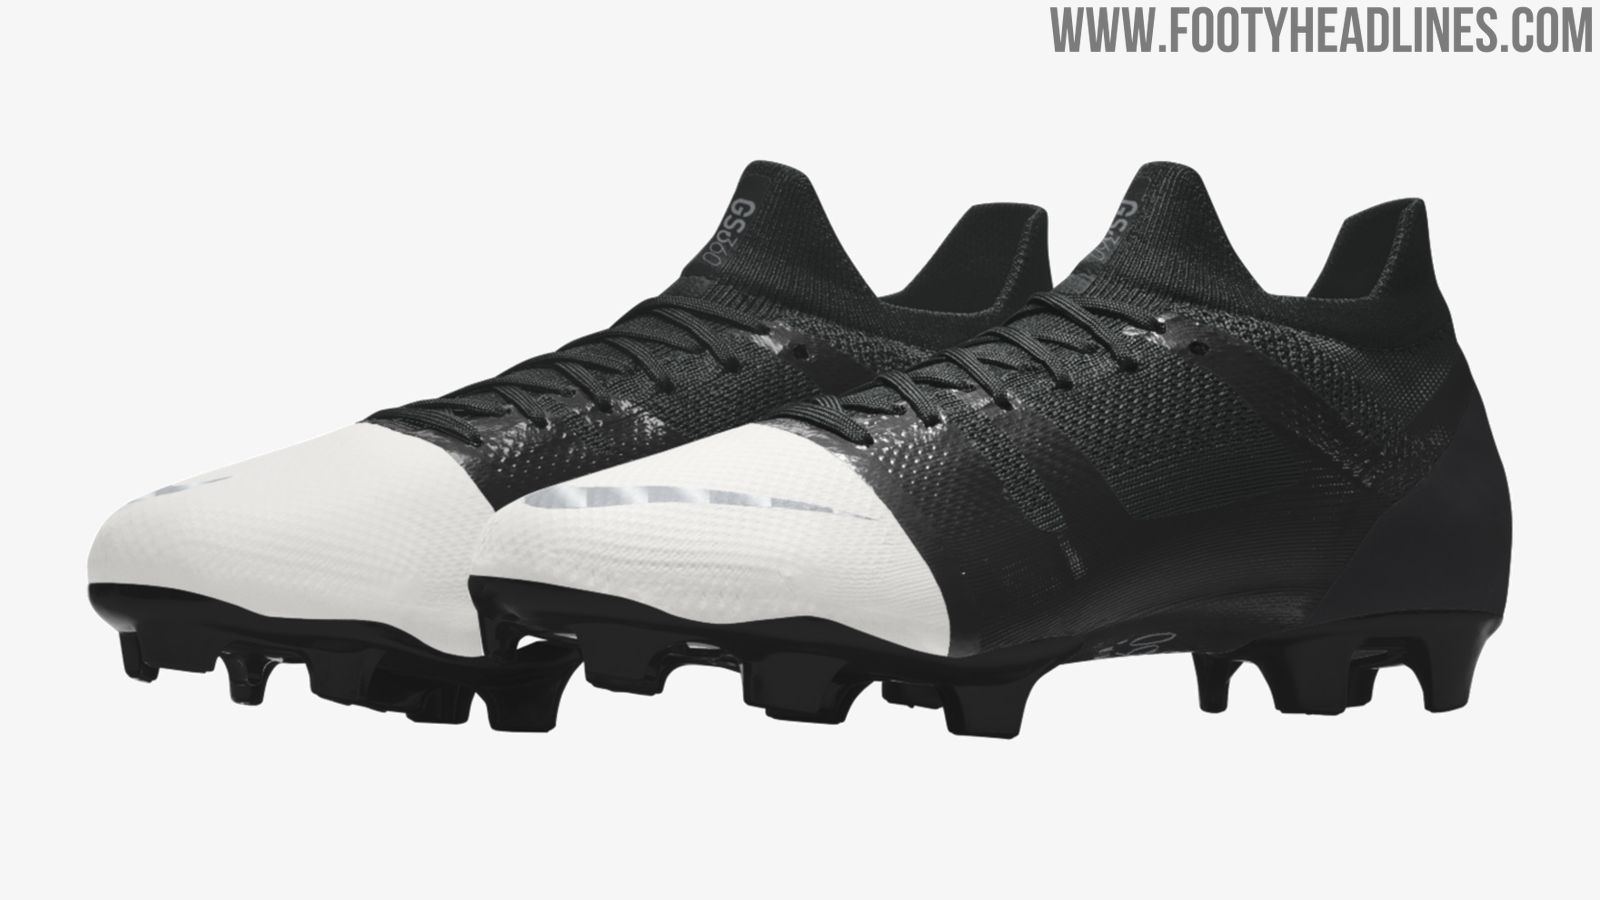 Nike Mercurial 360 iD Launched Still - Footy Headlines